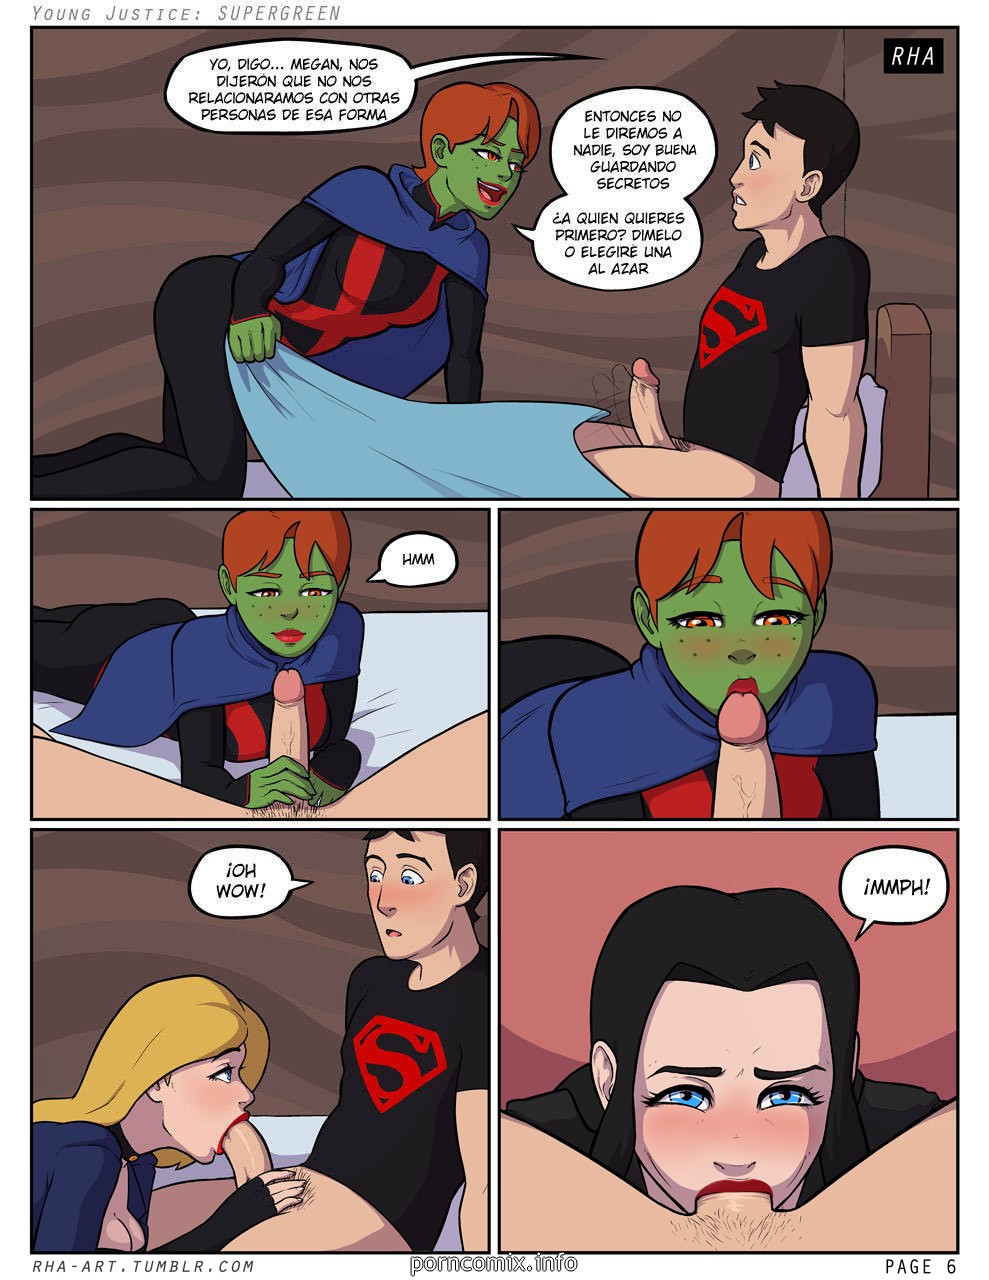 989px x 1280px - Young Justice - Supergreen - ChoChoX.com